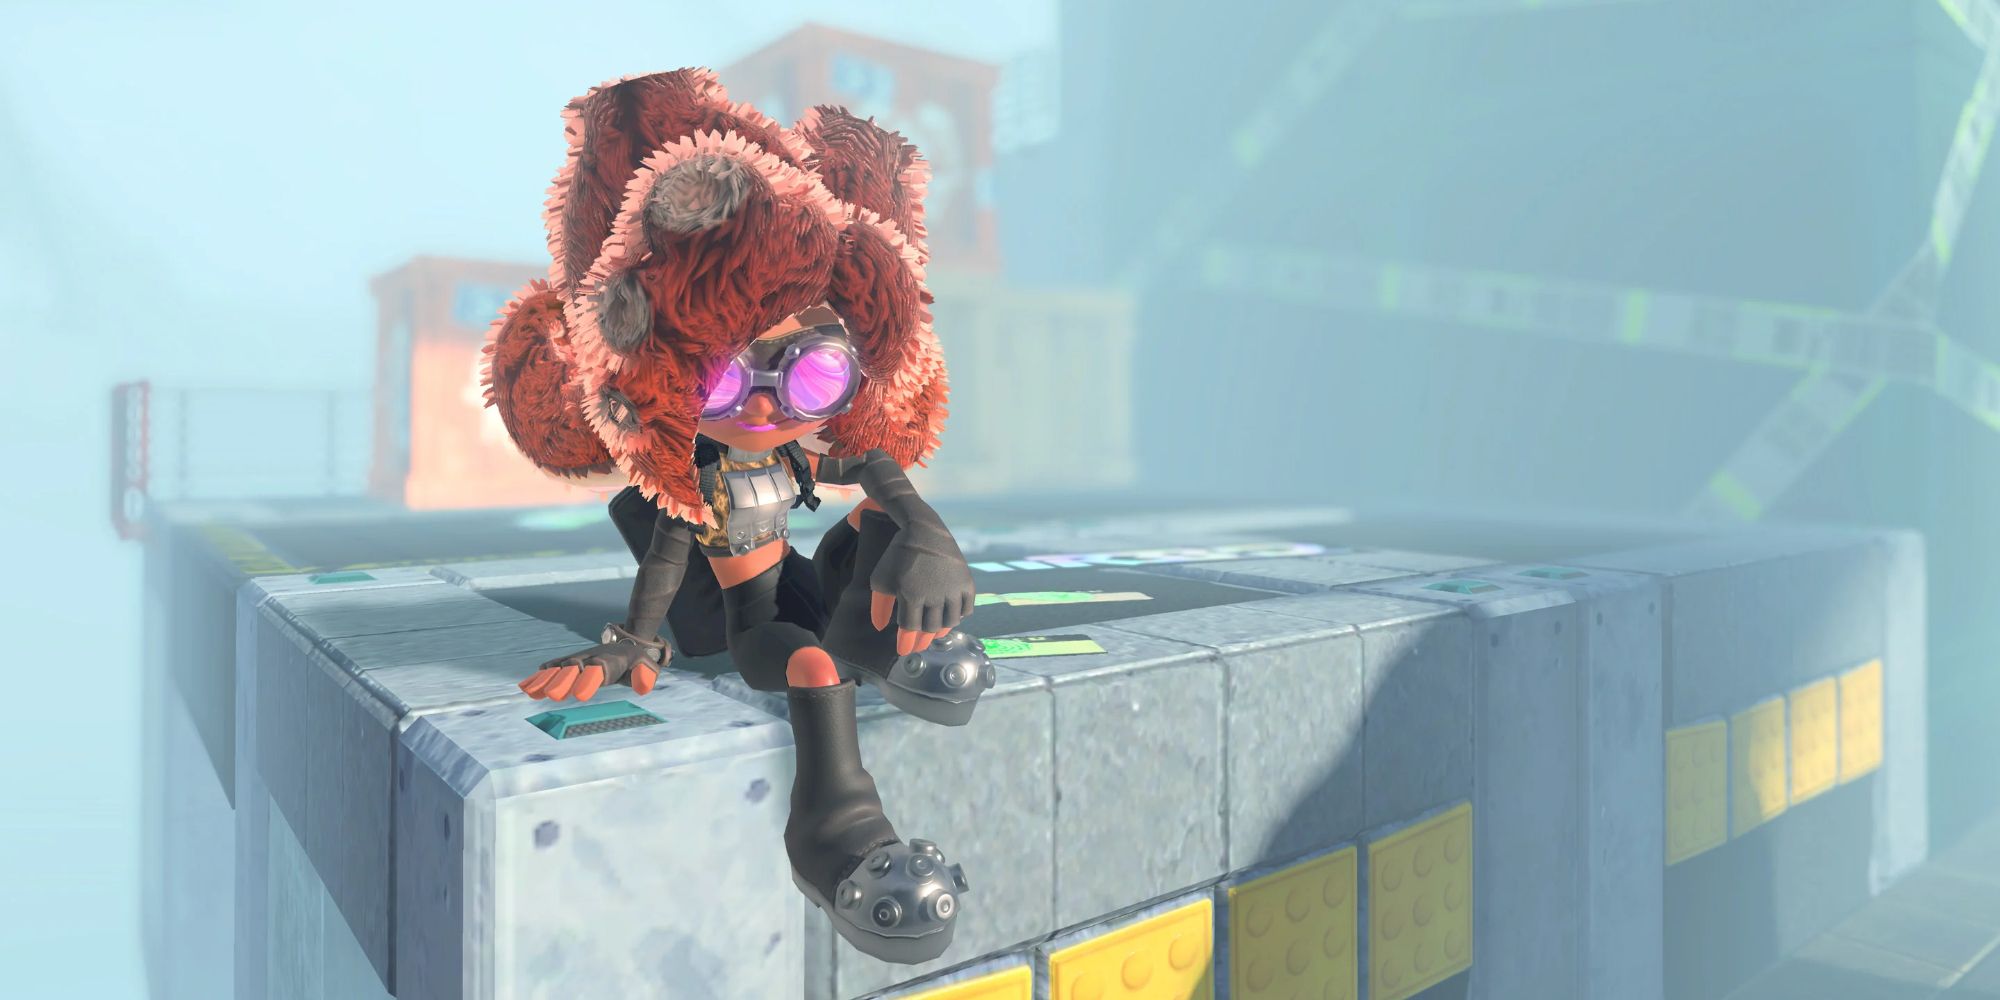 Octoling is sitting on a building